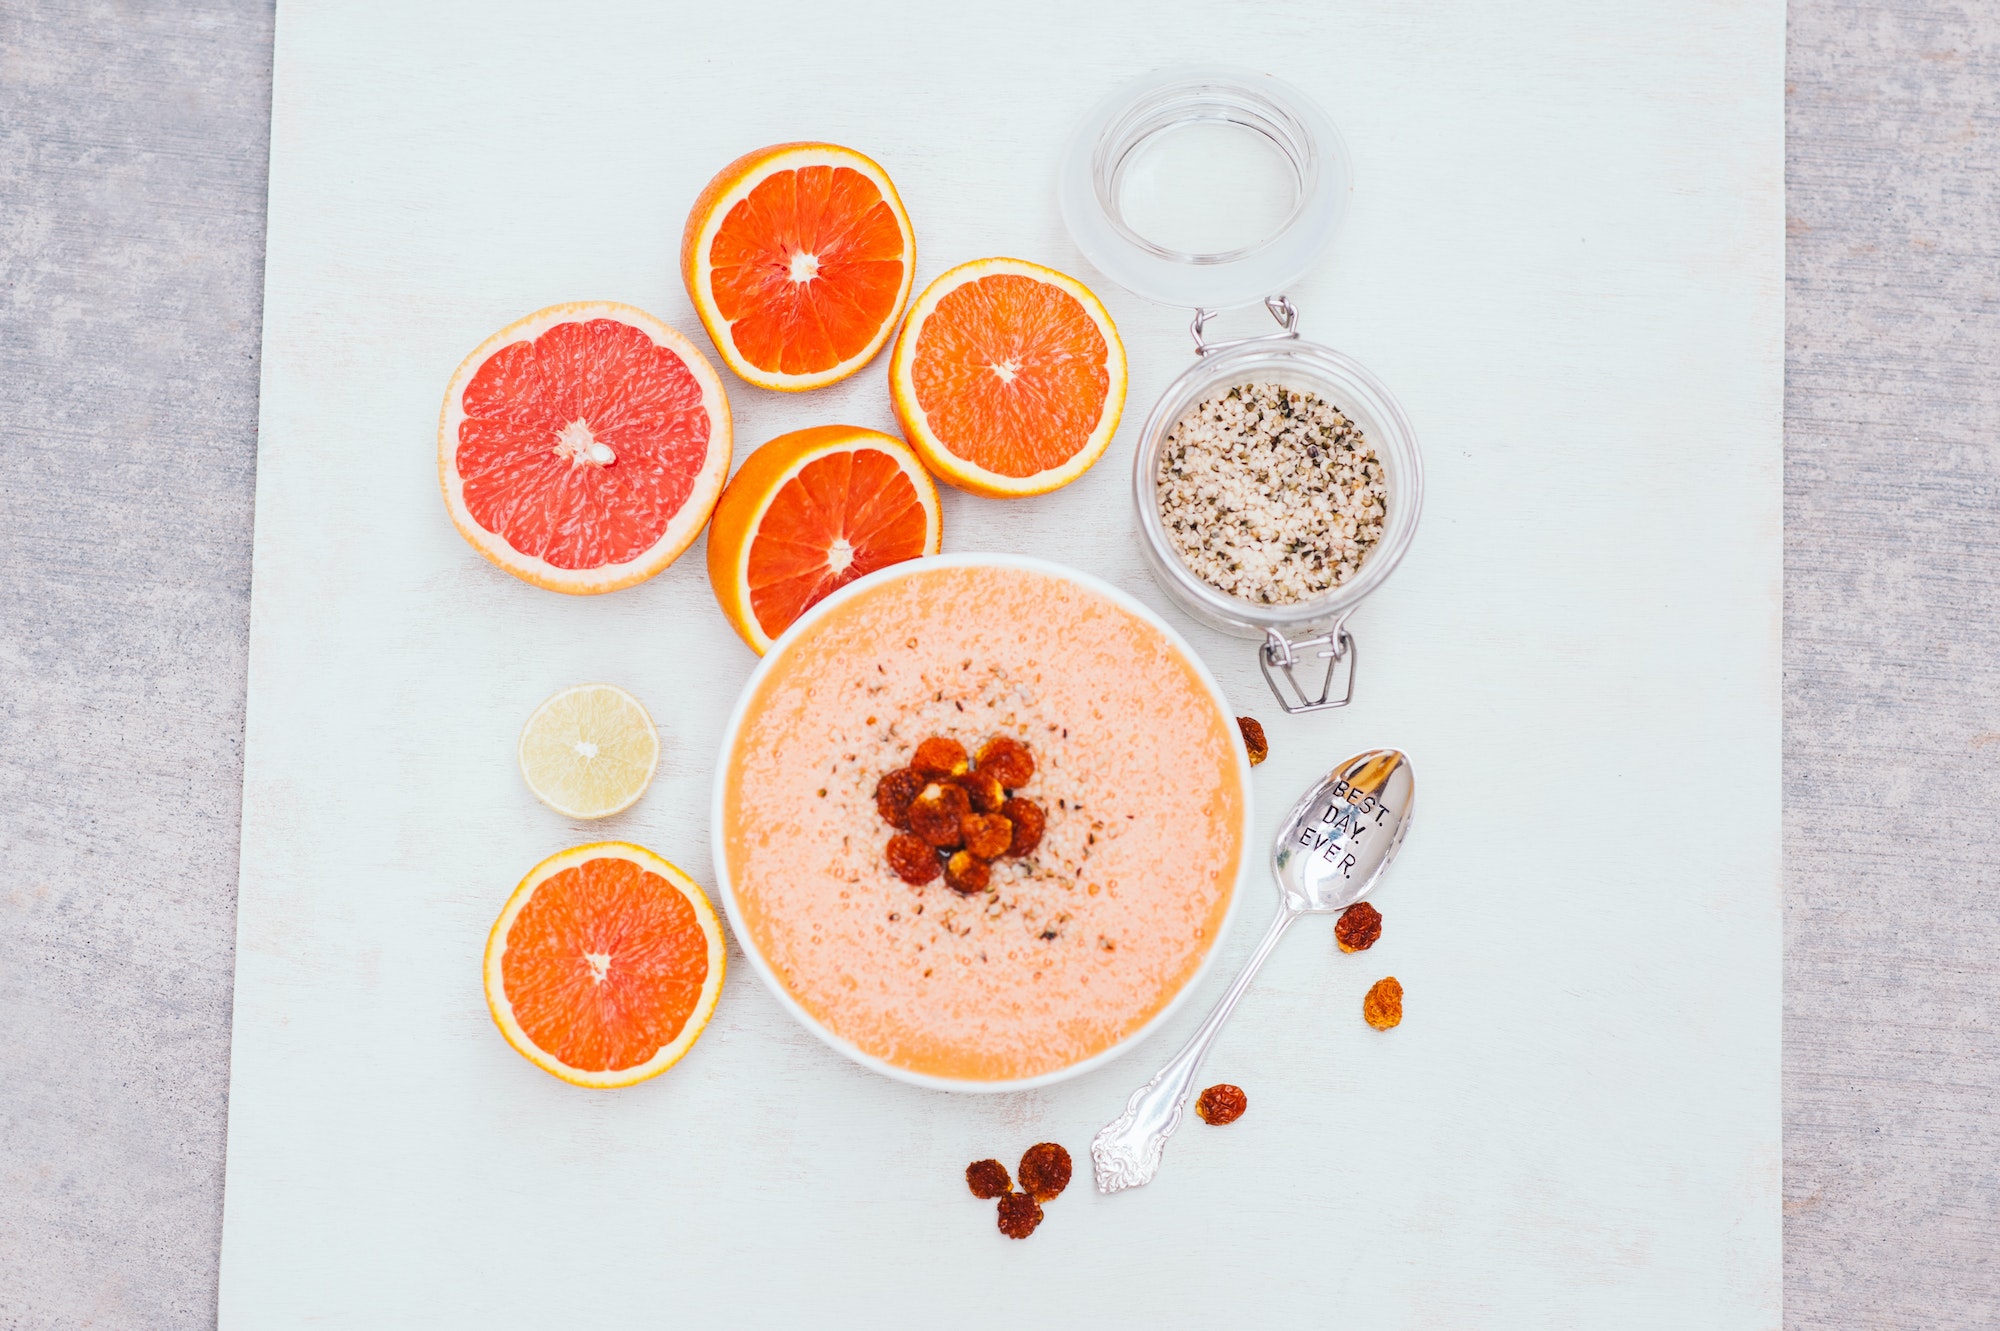 Smoothie bowl with slices or orange, lime or grapefruit, hempseed, spoon. Dry golden berry